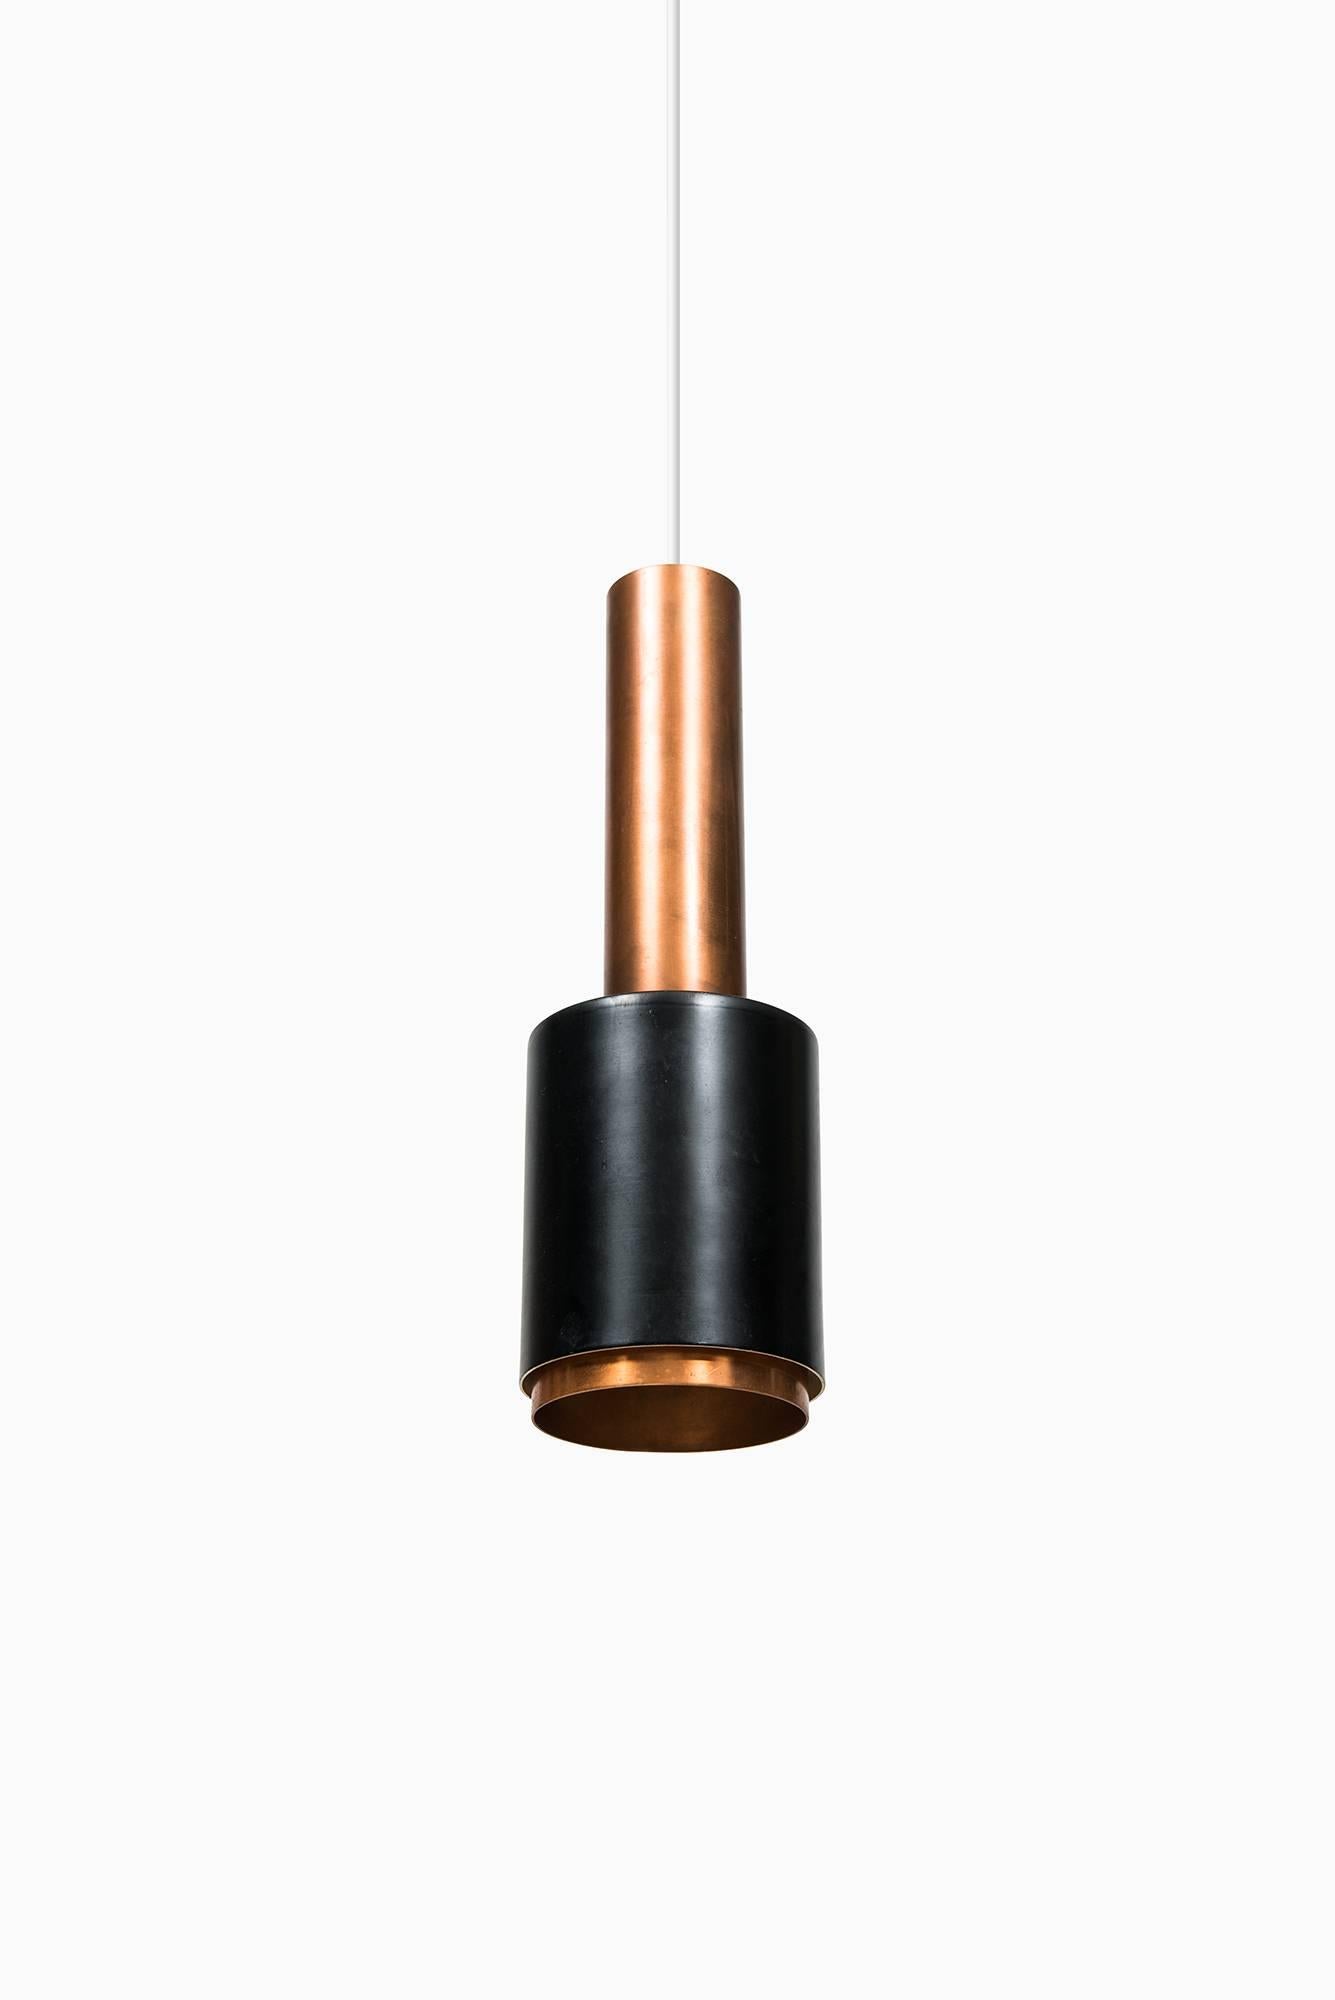 Scandinavian Modern Pair of Ceiling Lamps in Copper and Black Lacquered Metal